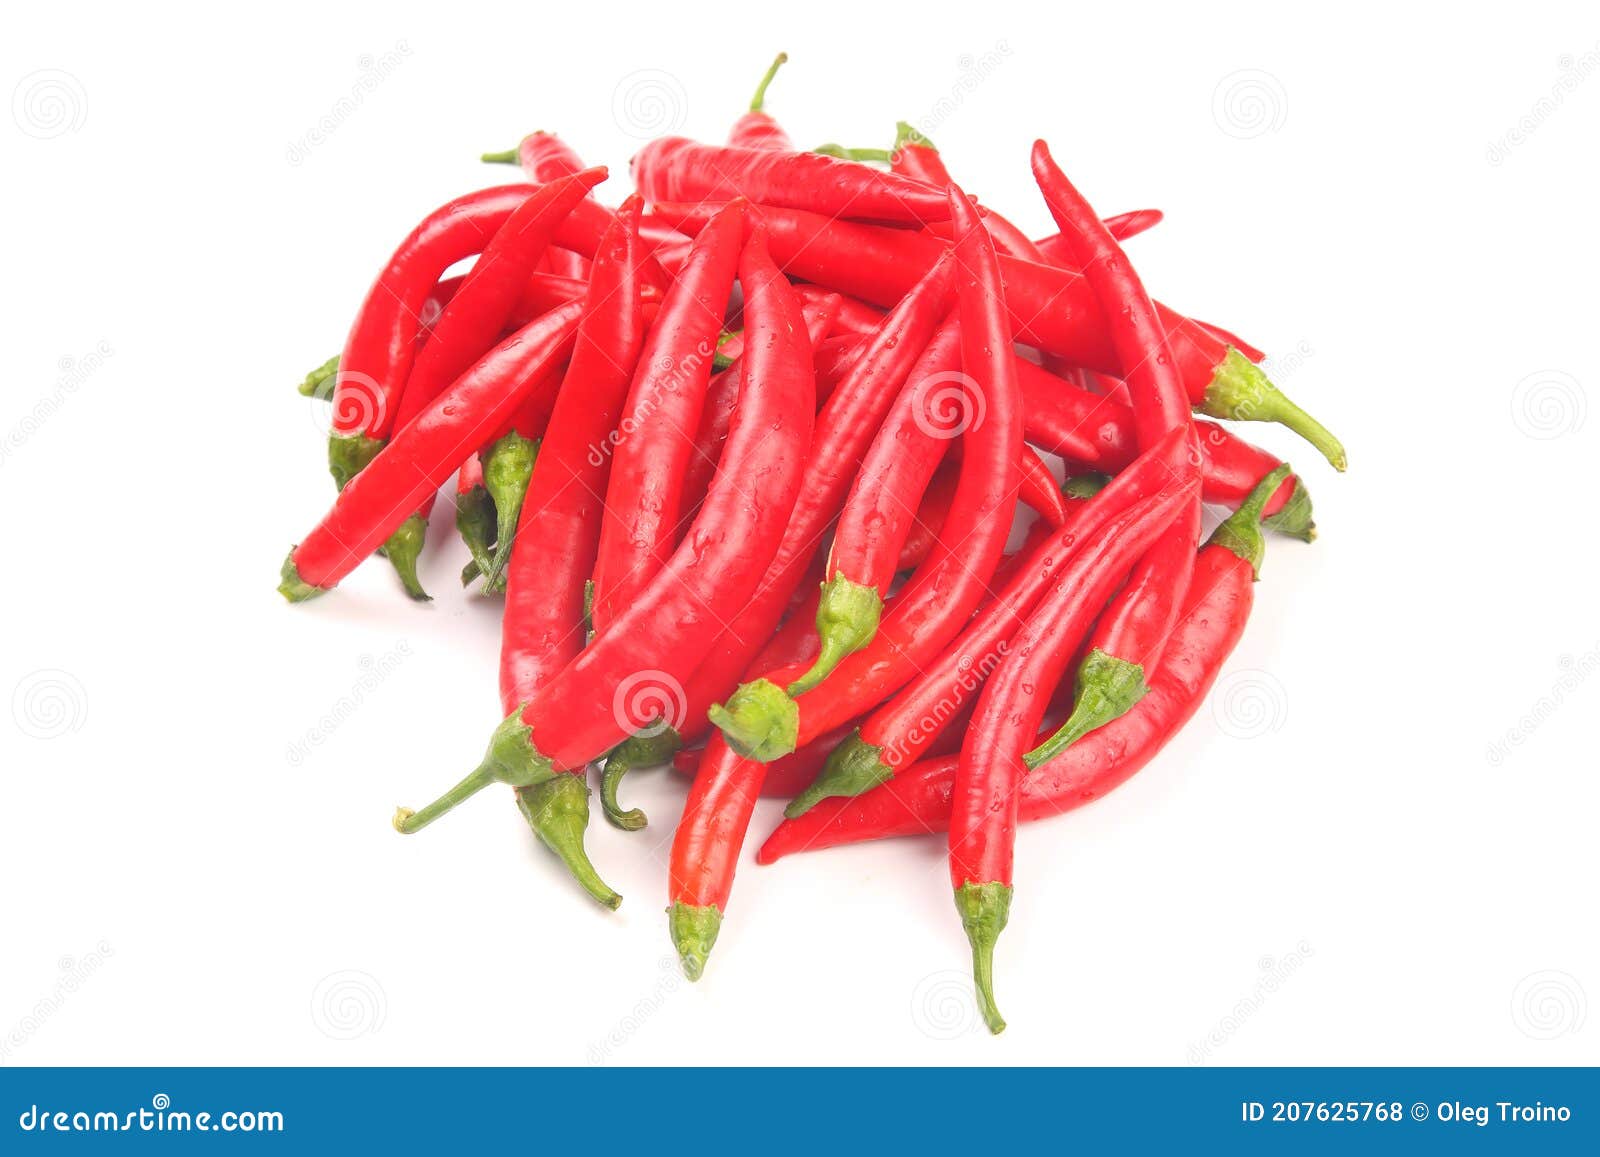 Red Hot Chili Peppers on a White Background. Vegetable Food Stock Photo - Image of chilli, kitchen: 207625768